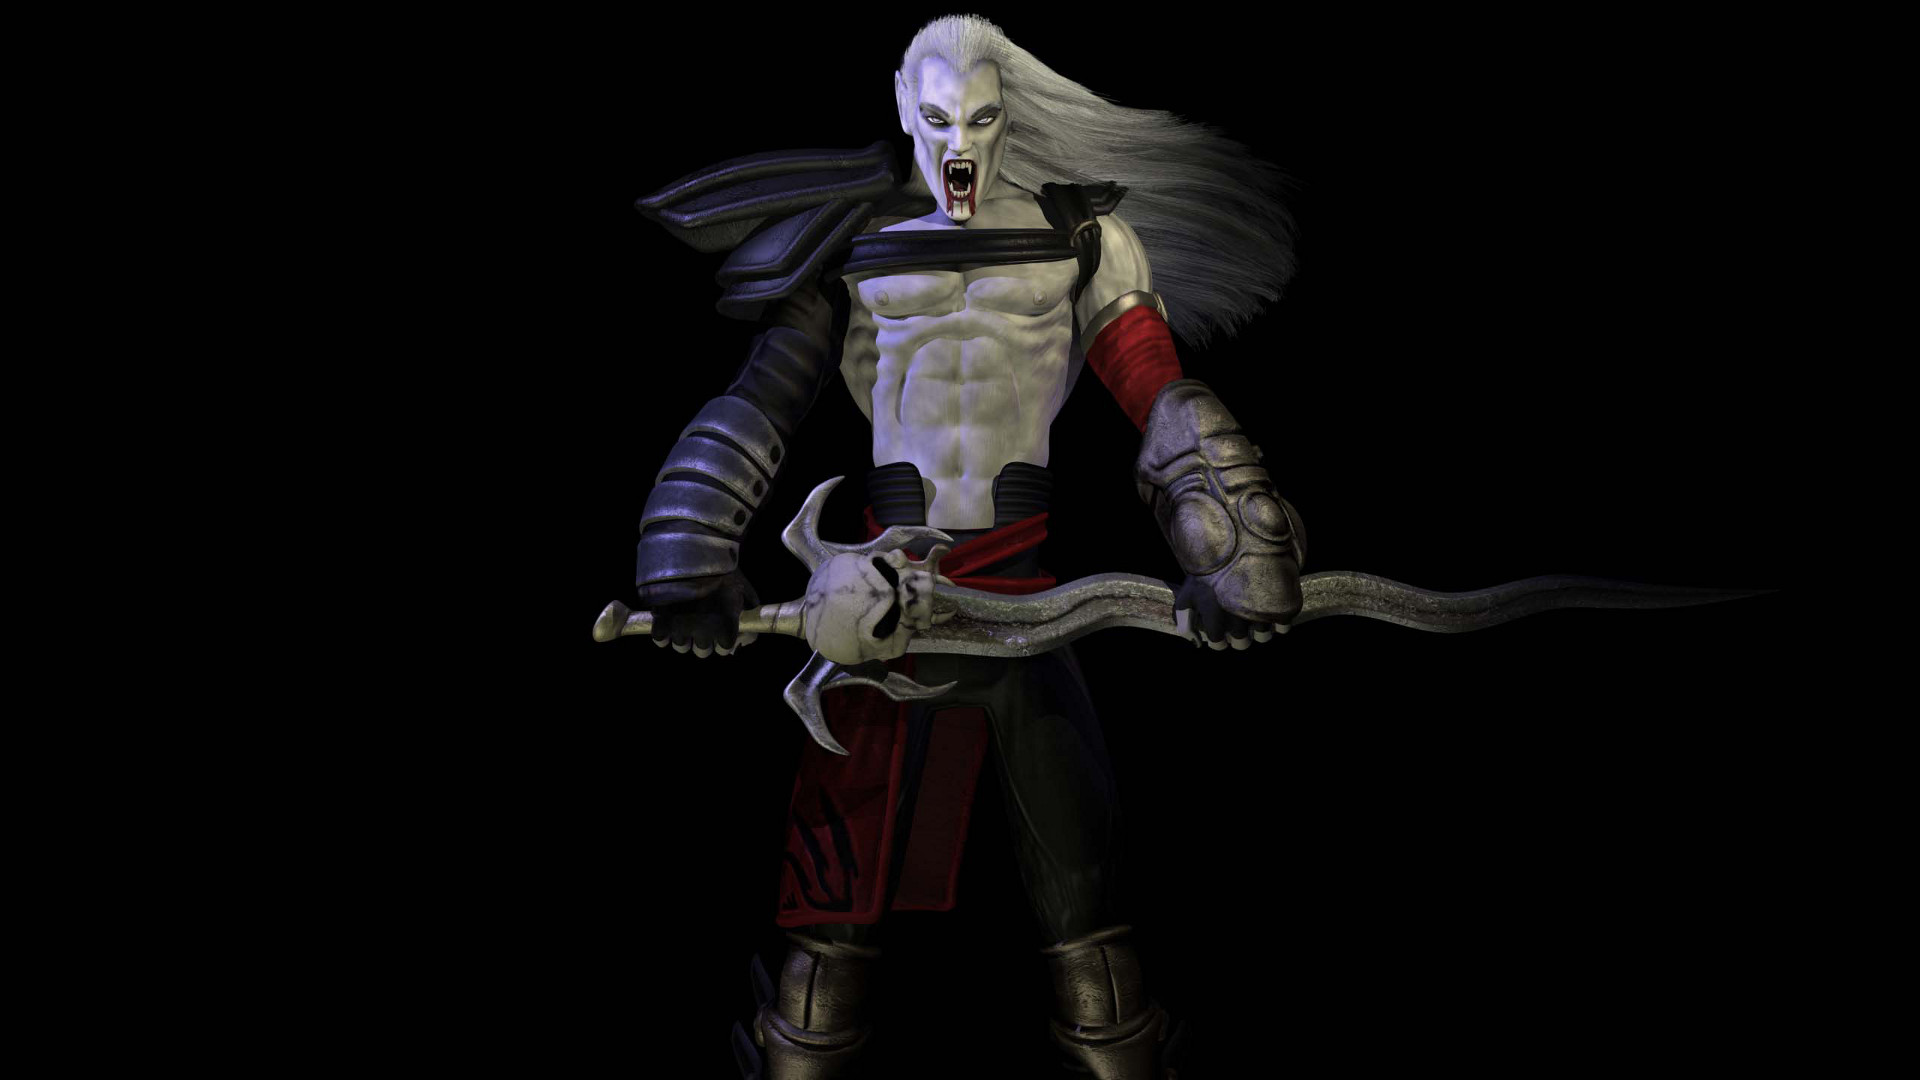 the-legacy-of-kain-series-blood-omen-2-details-launchbox-games-database